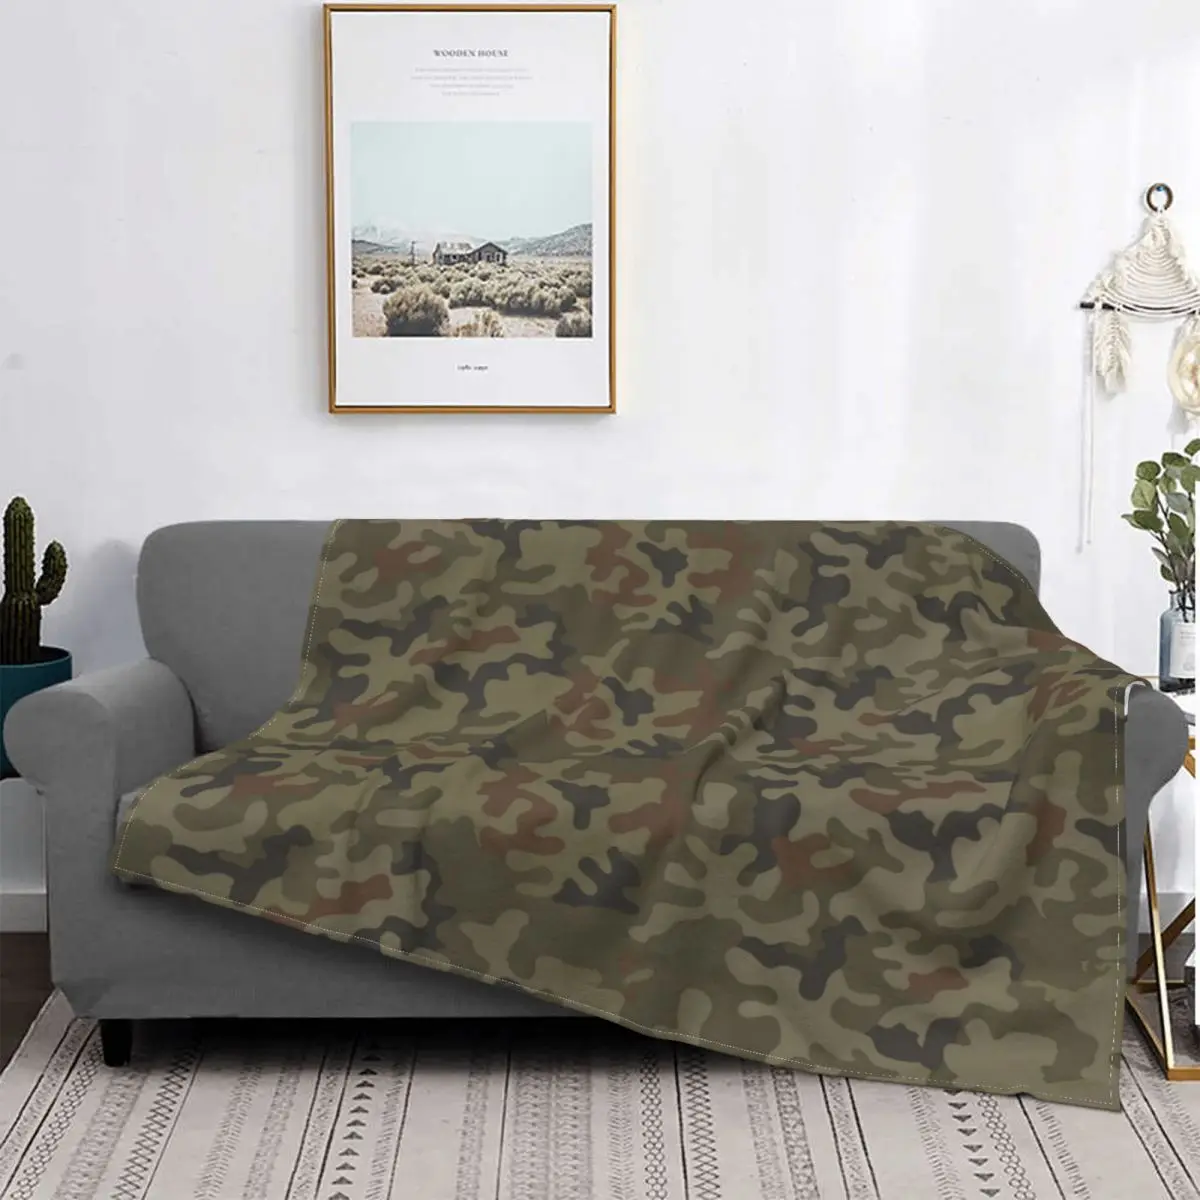 

Polish Camouflage Grom Camo Blanket Fleece Printed Armed Army Multifunction Super Soft Throw Blanket for Home Couch Bedspreads